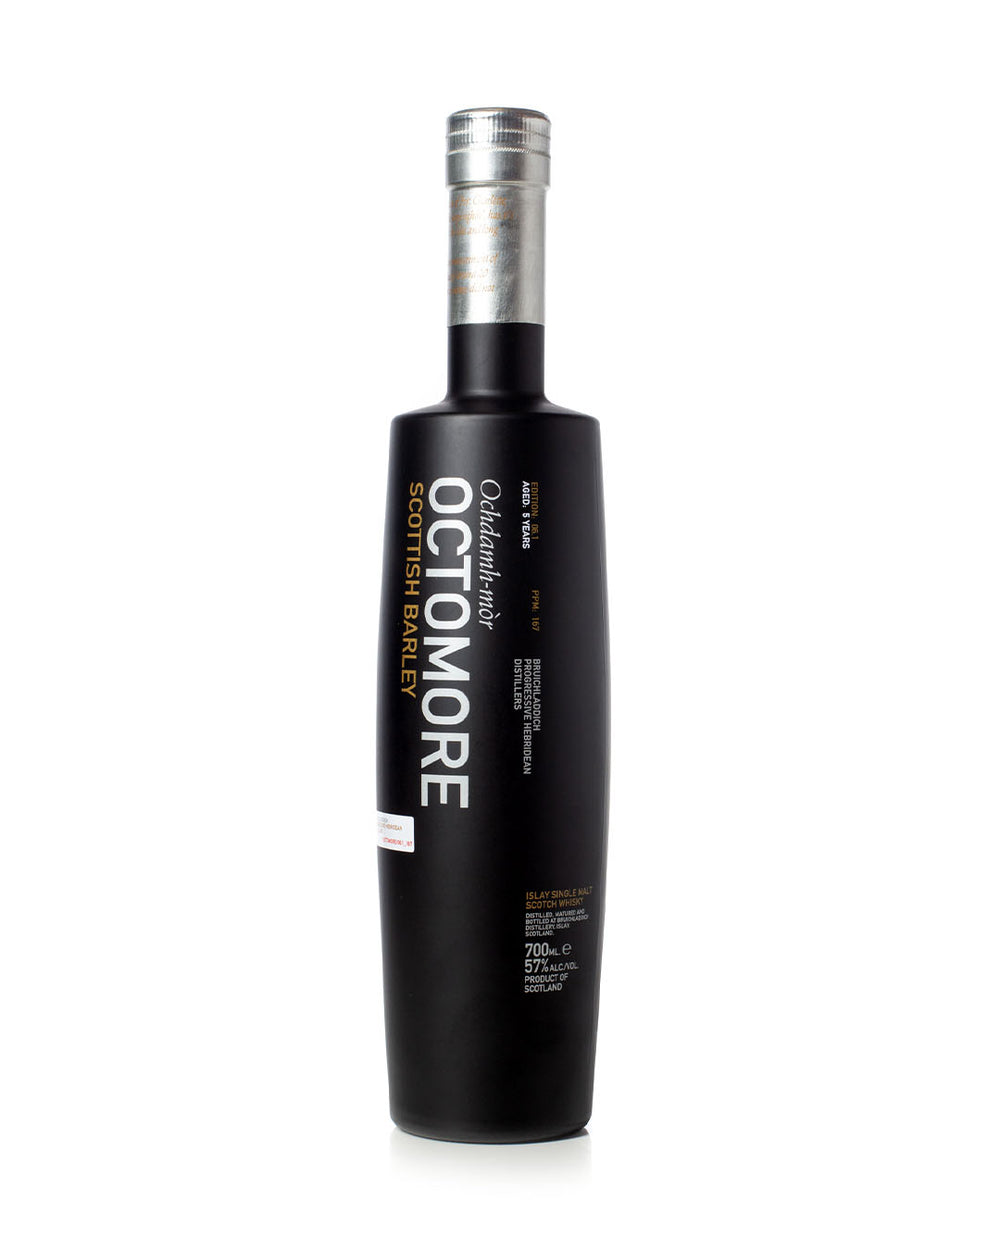 Buy Octomore 5 Year Old Edition 06.1 167 PPM whisky